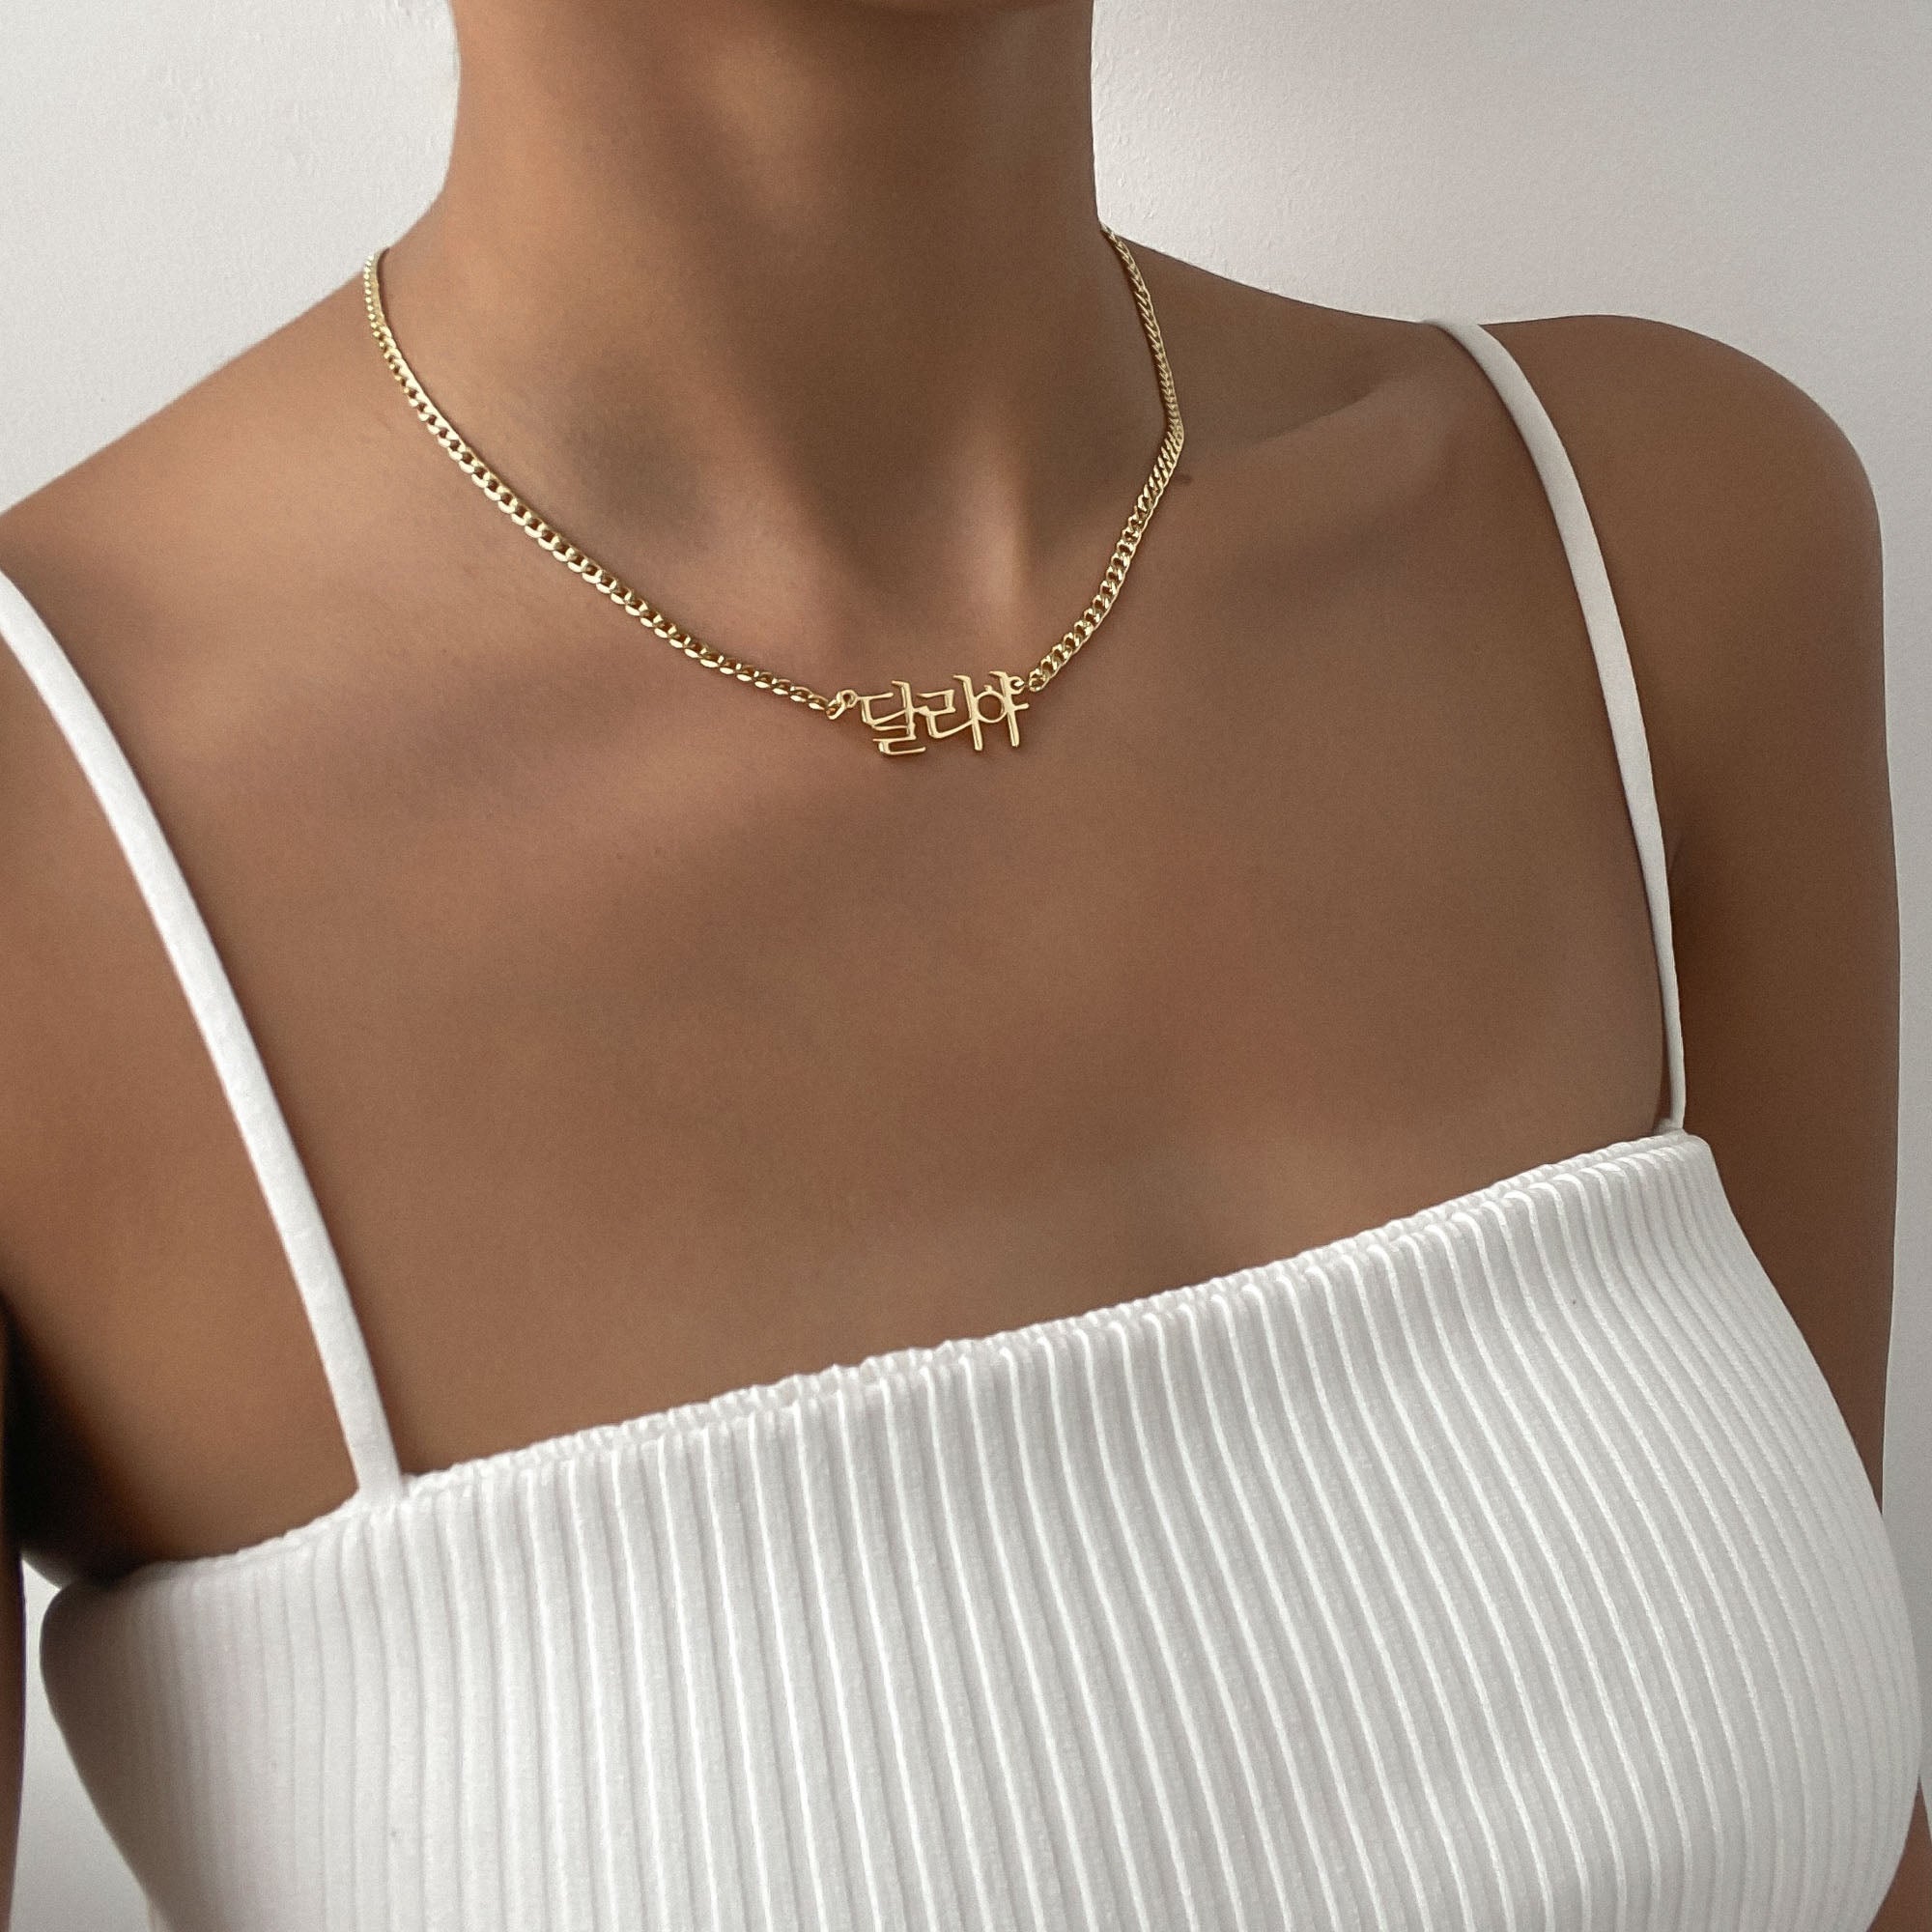 Woman modelling gold Korean Name Necklace